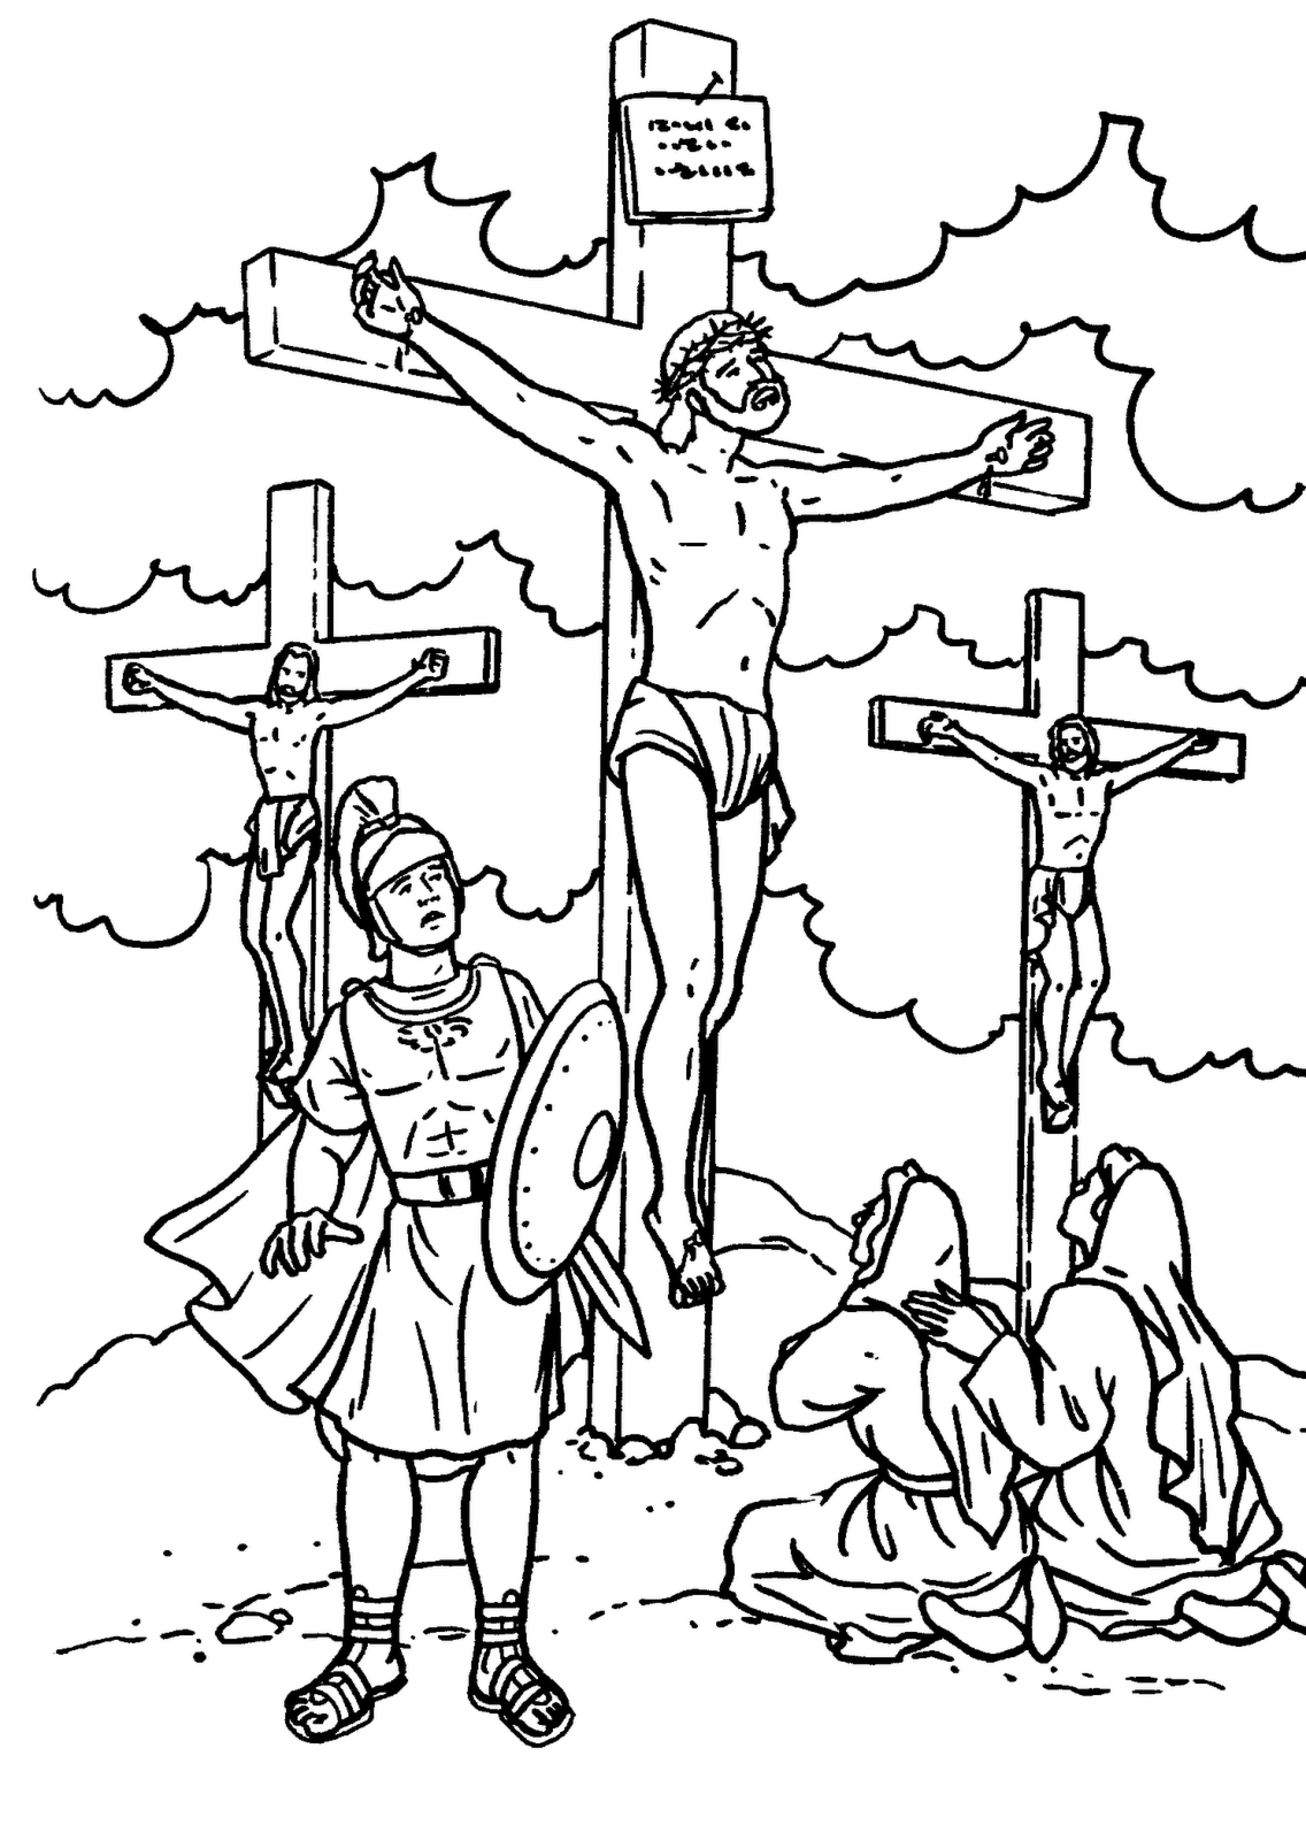 Jesus died on the cross for our sins sunday school coloring pages bible coloring pages christian coloring